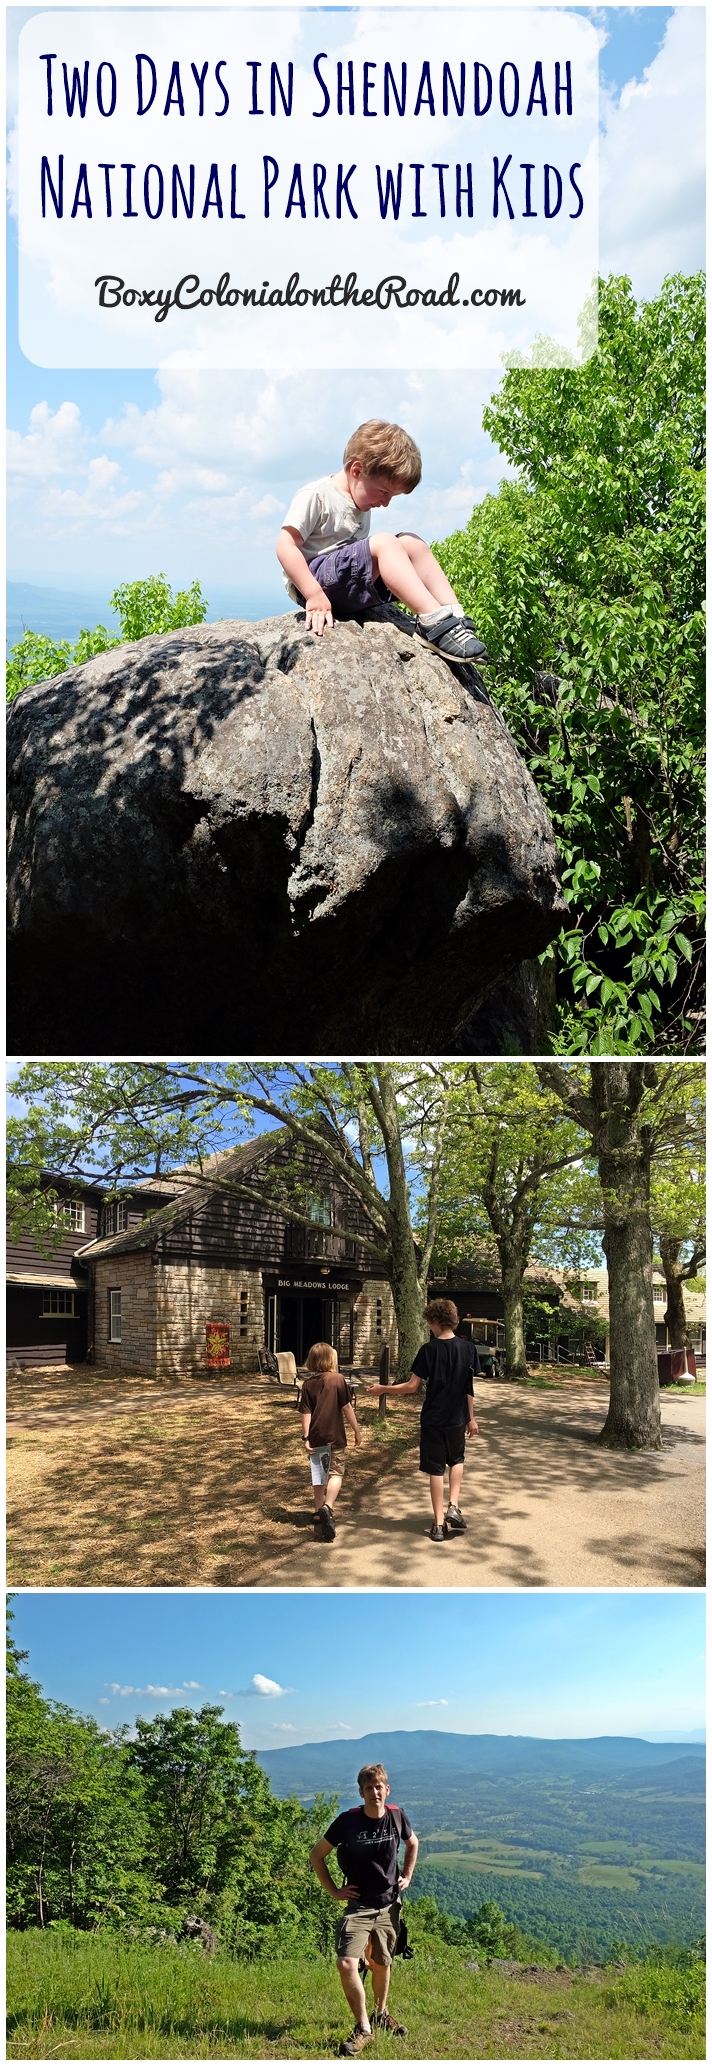 Two days in Shenandoah National Park with kids: junior ranger badges, visitors centers, hiking the Story of the Forest and Snead Farm trails